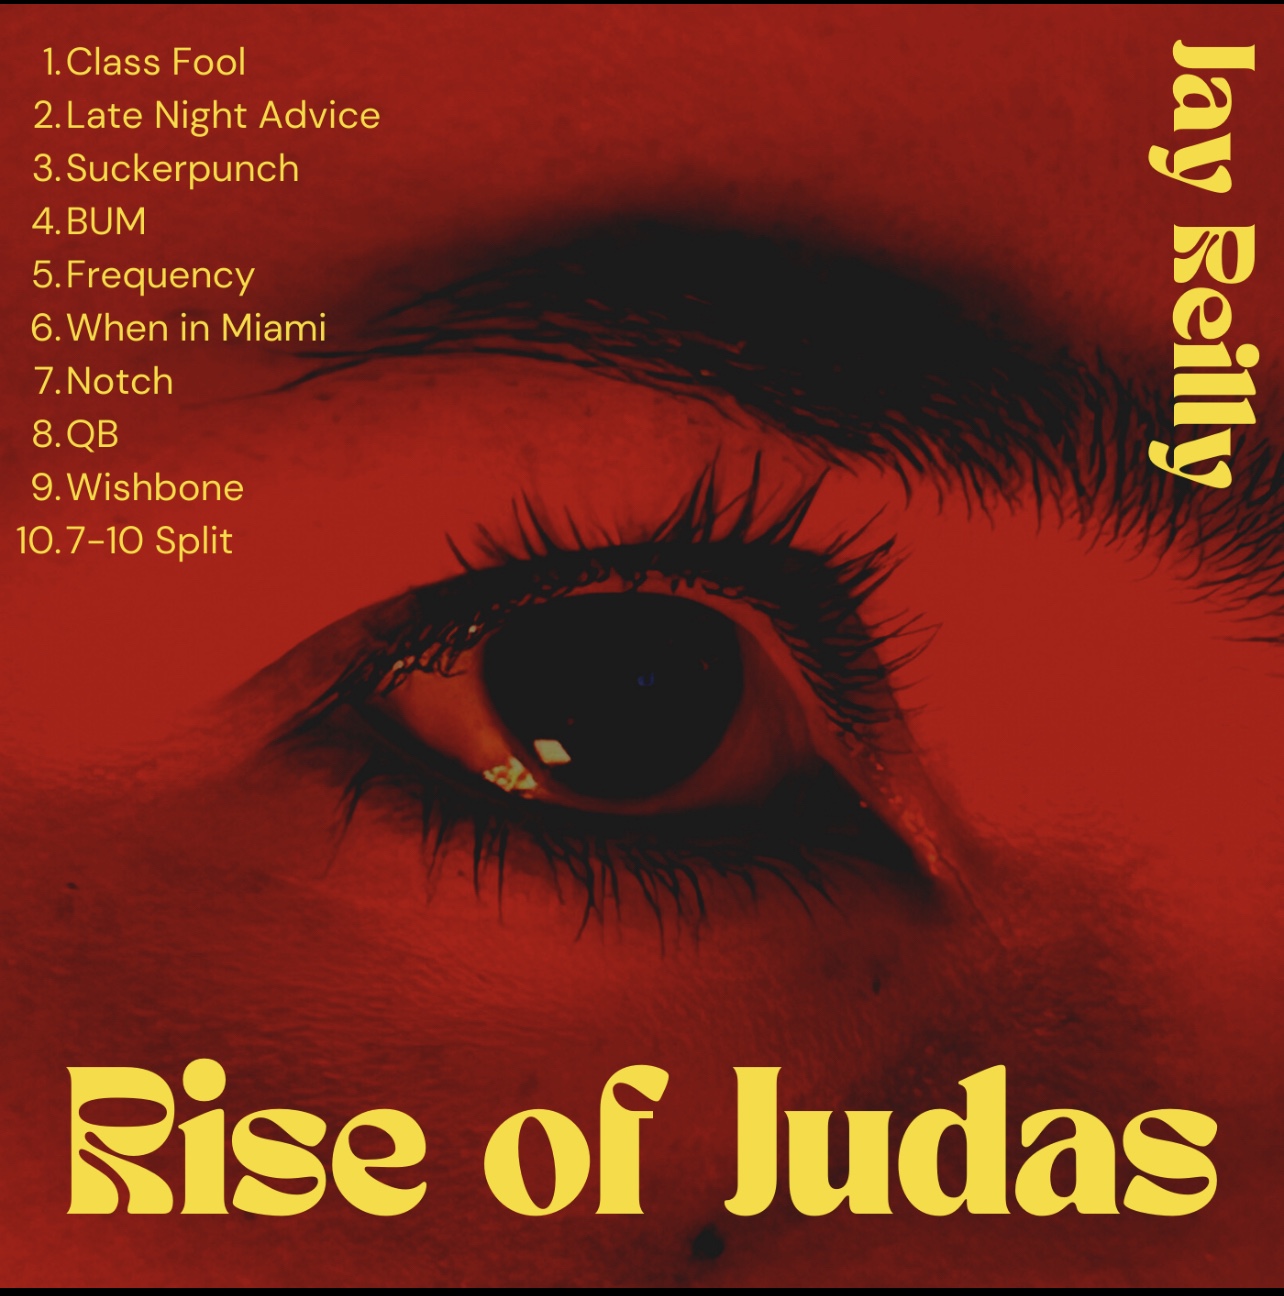 PolitiKan Per Usual: Jay Reilly Drops His Latest Release “Rise Of Juda”